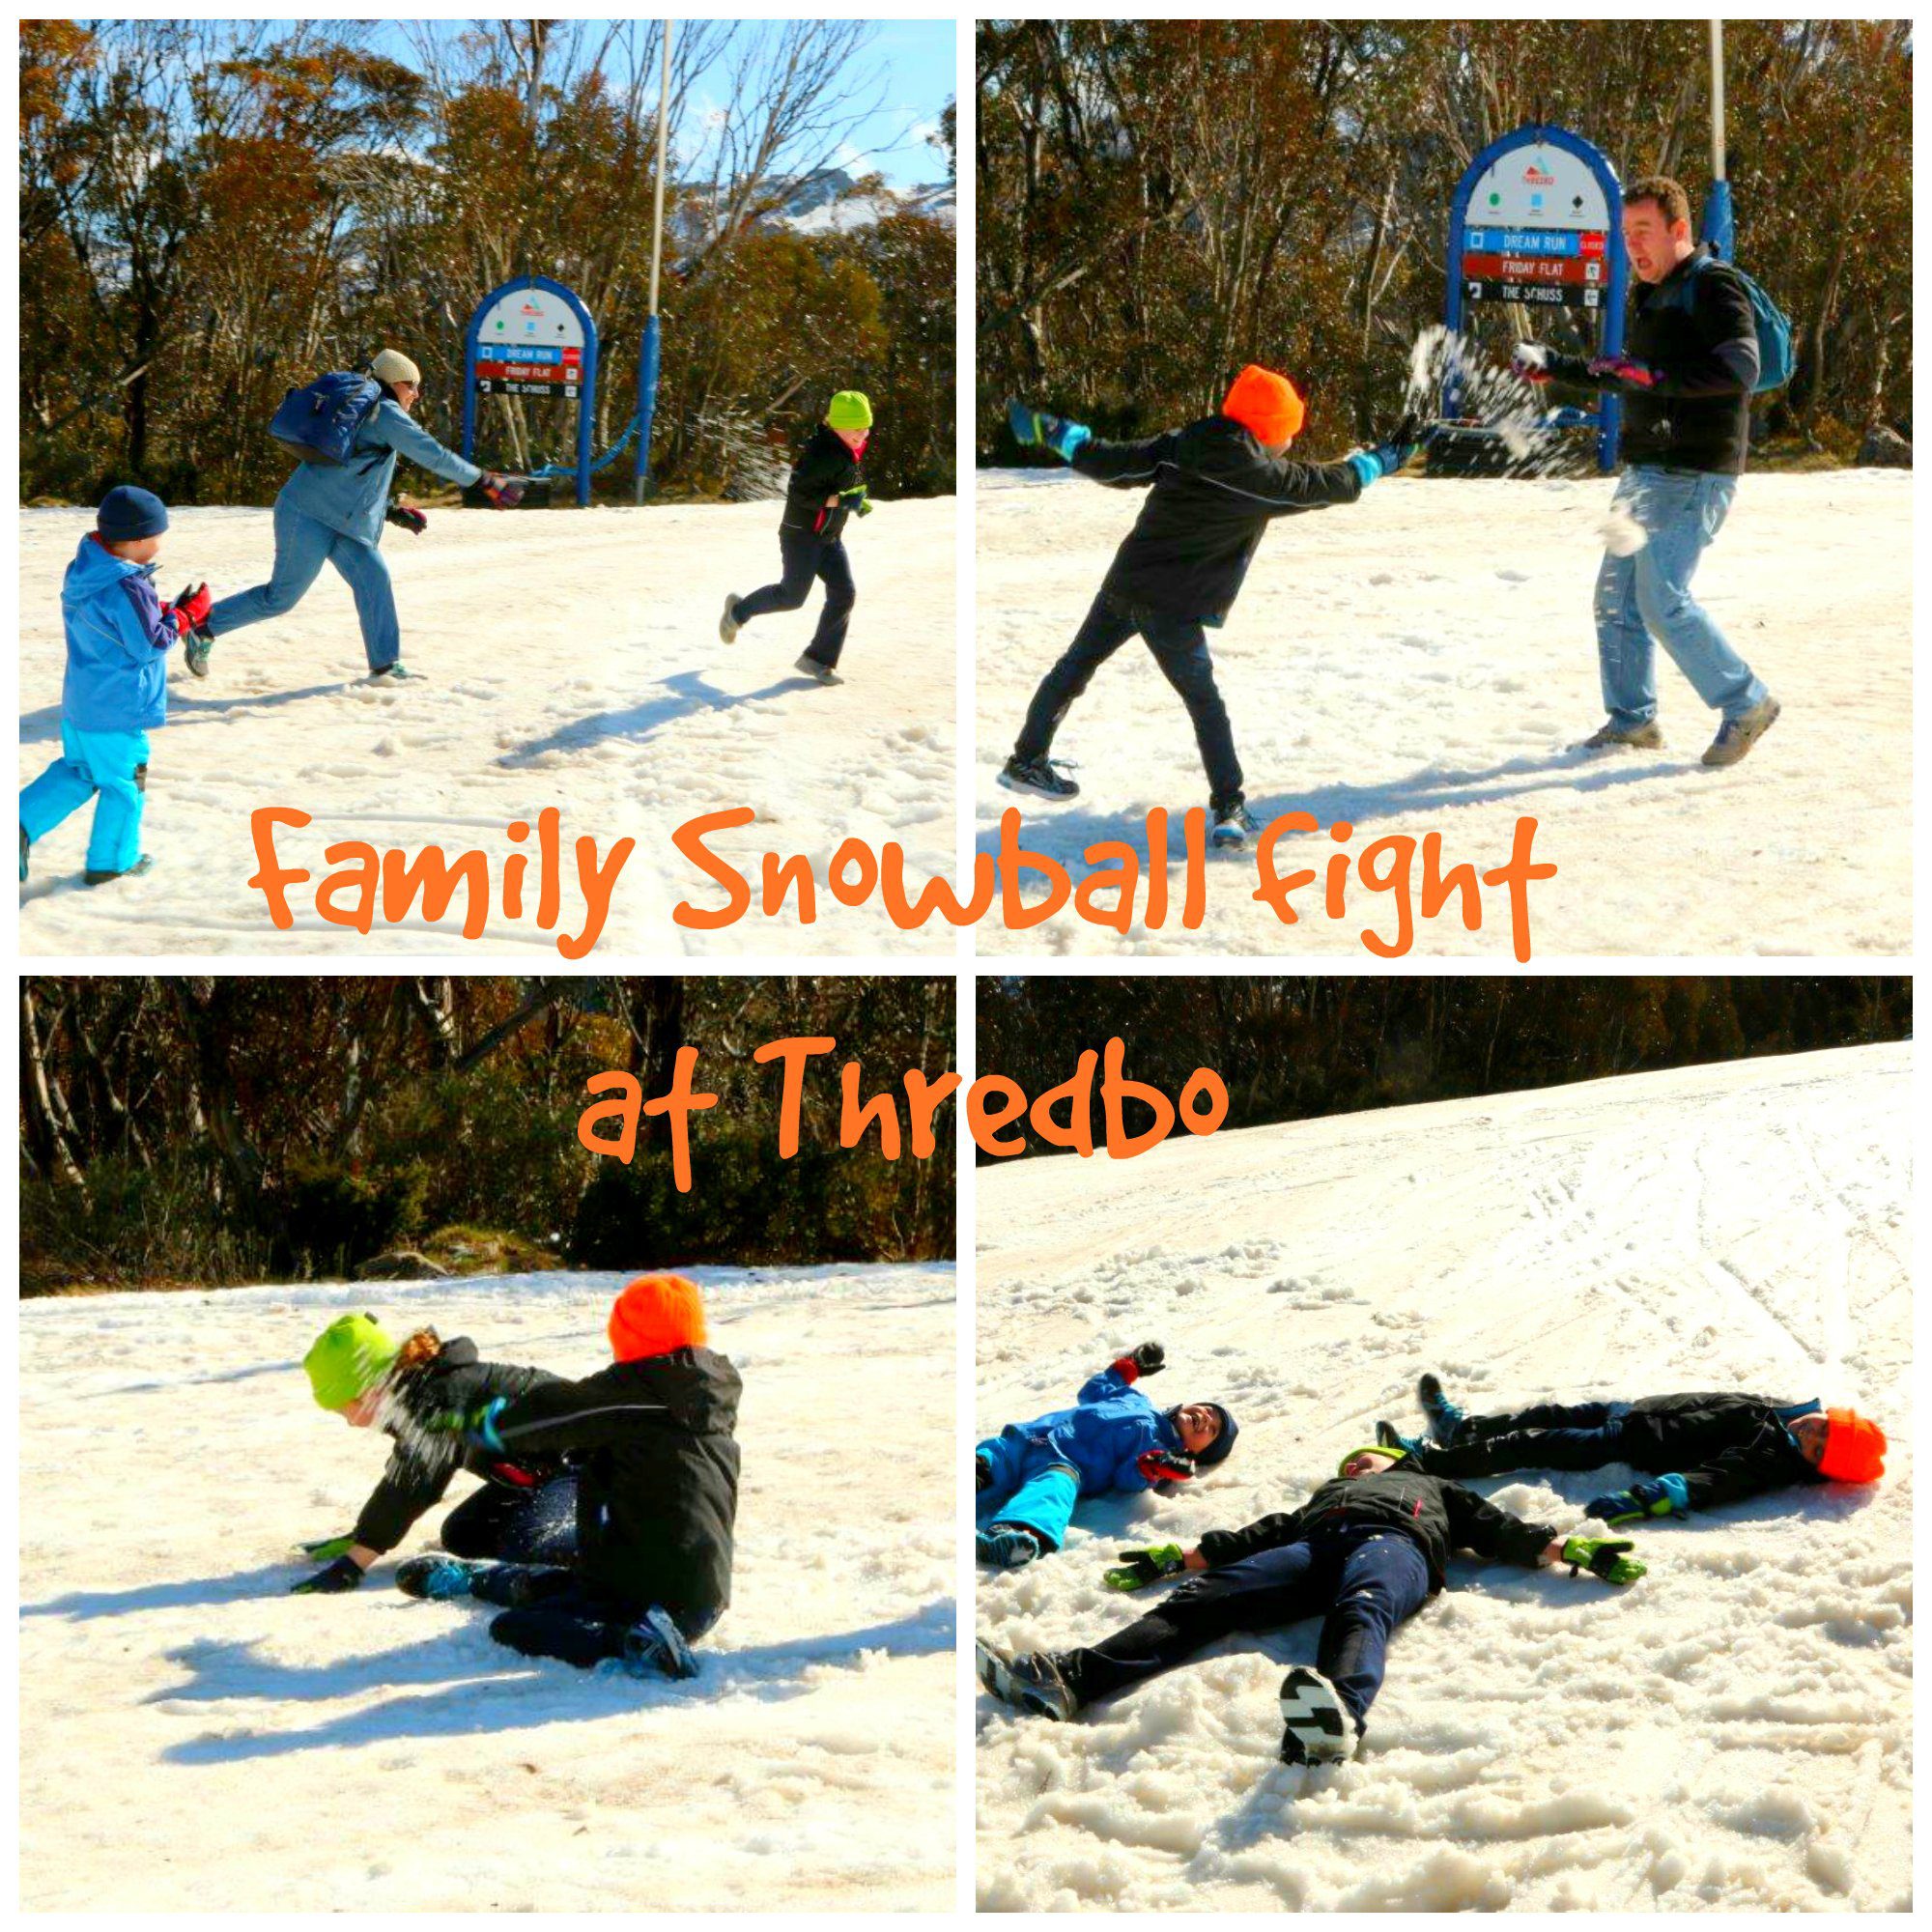 Family Snowball Fight at Thredbo in the Snowy Mountains Australia